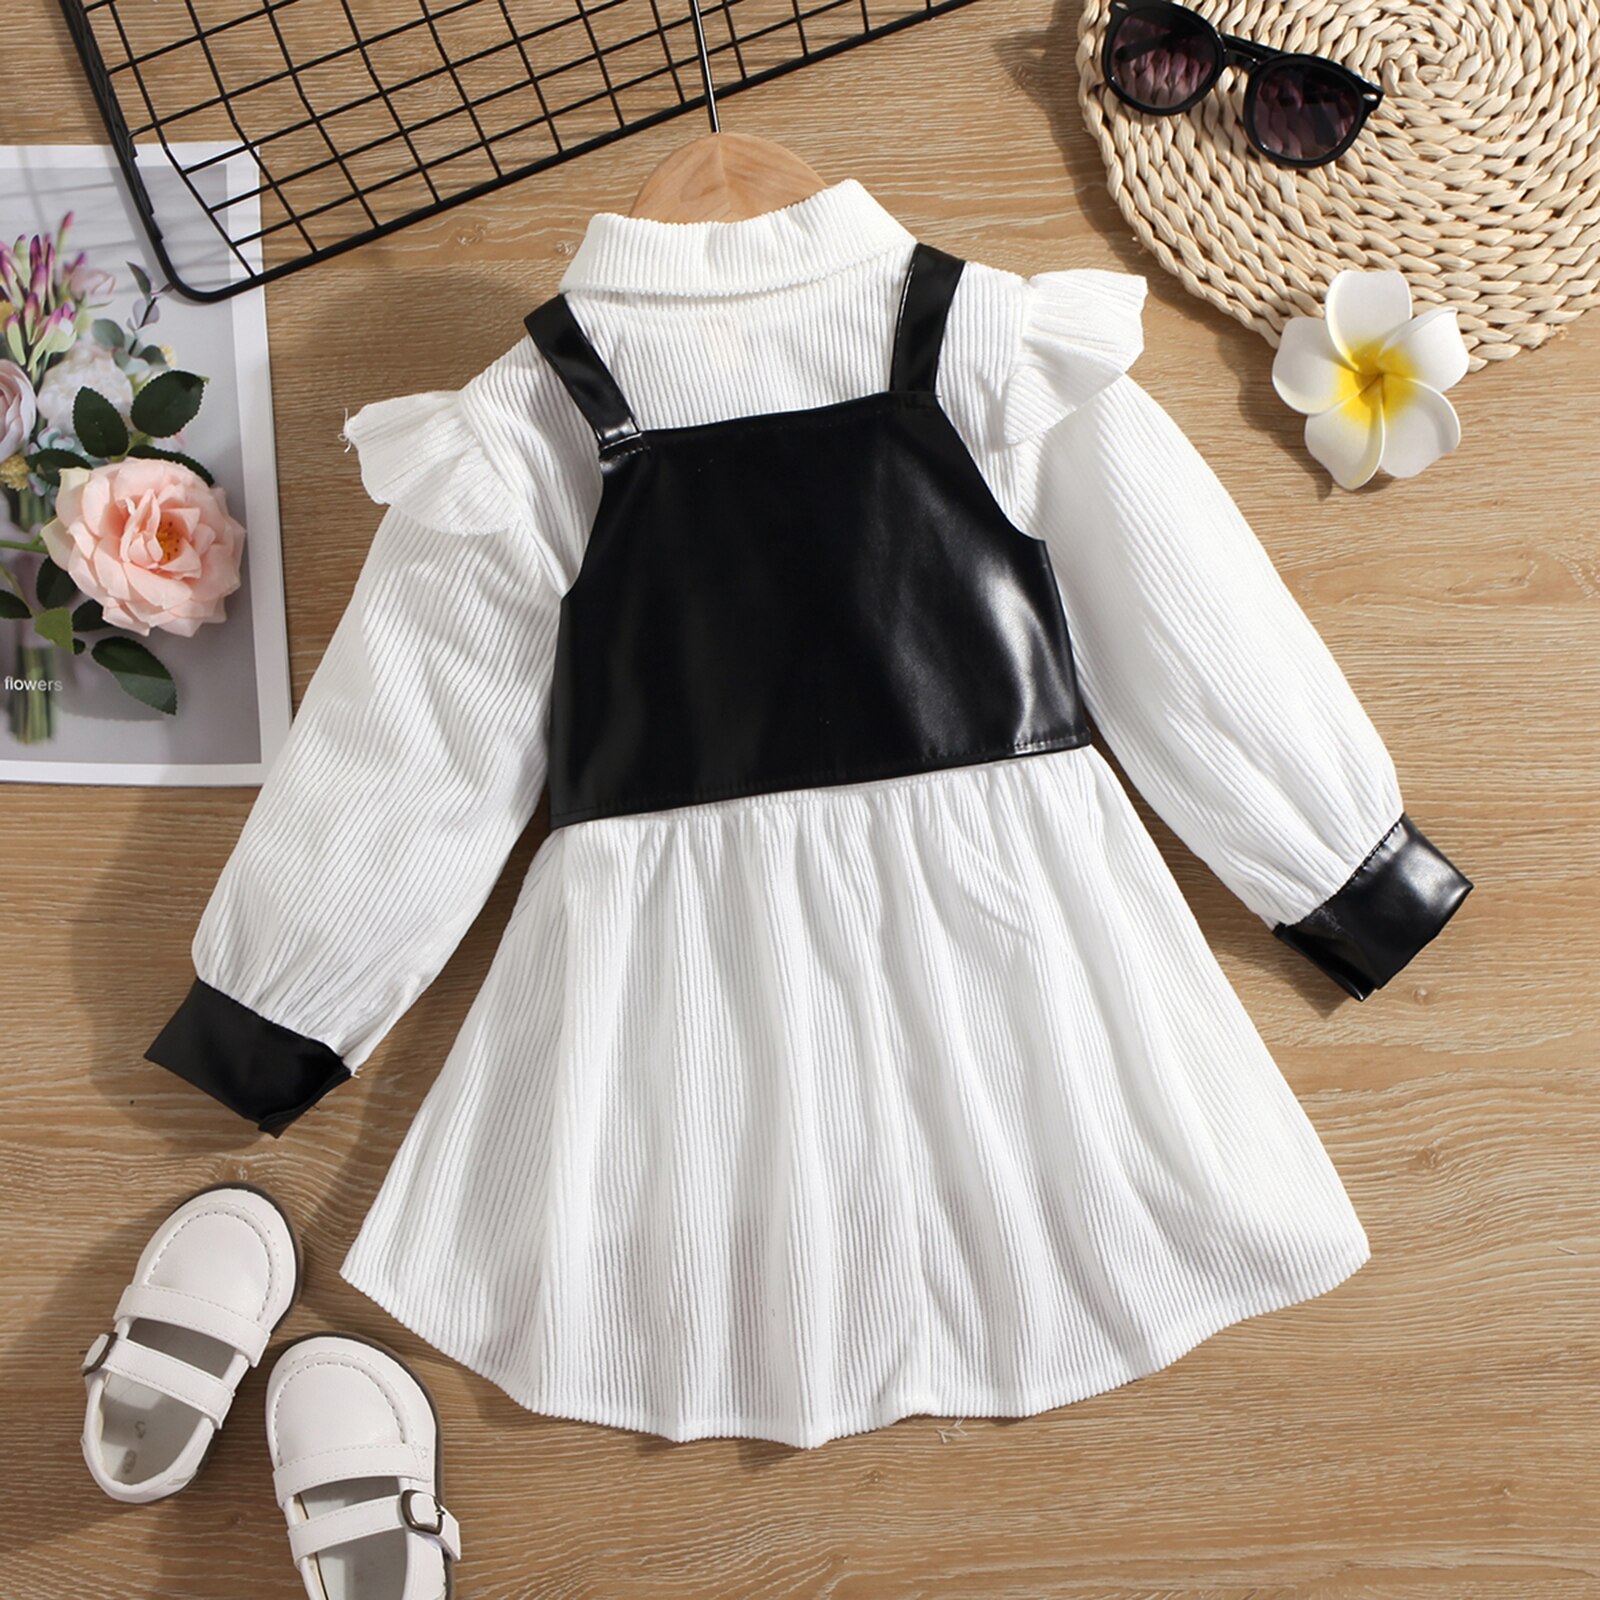 Fashion-Kids-Girls-Autumn-Clothes-Sets-2pcs-Solid-Color-Long-Sleeve-Turn-Down-Collar-Corduroy-Dress-2